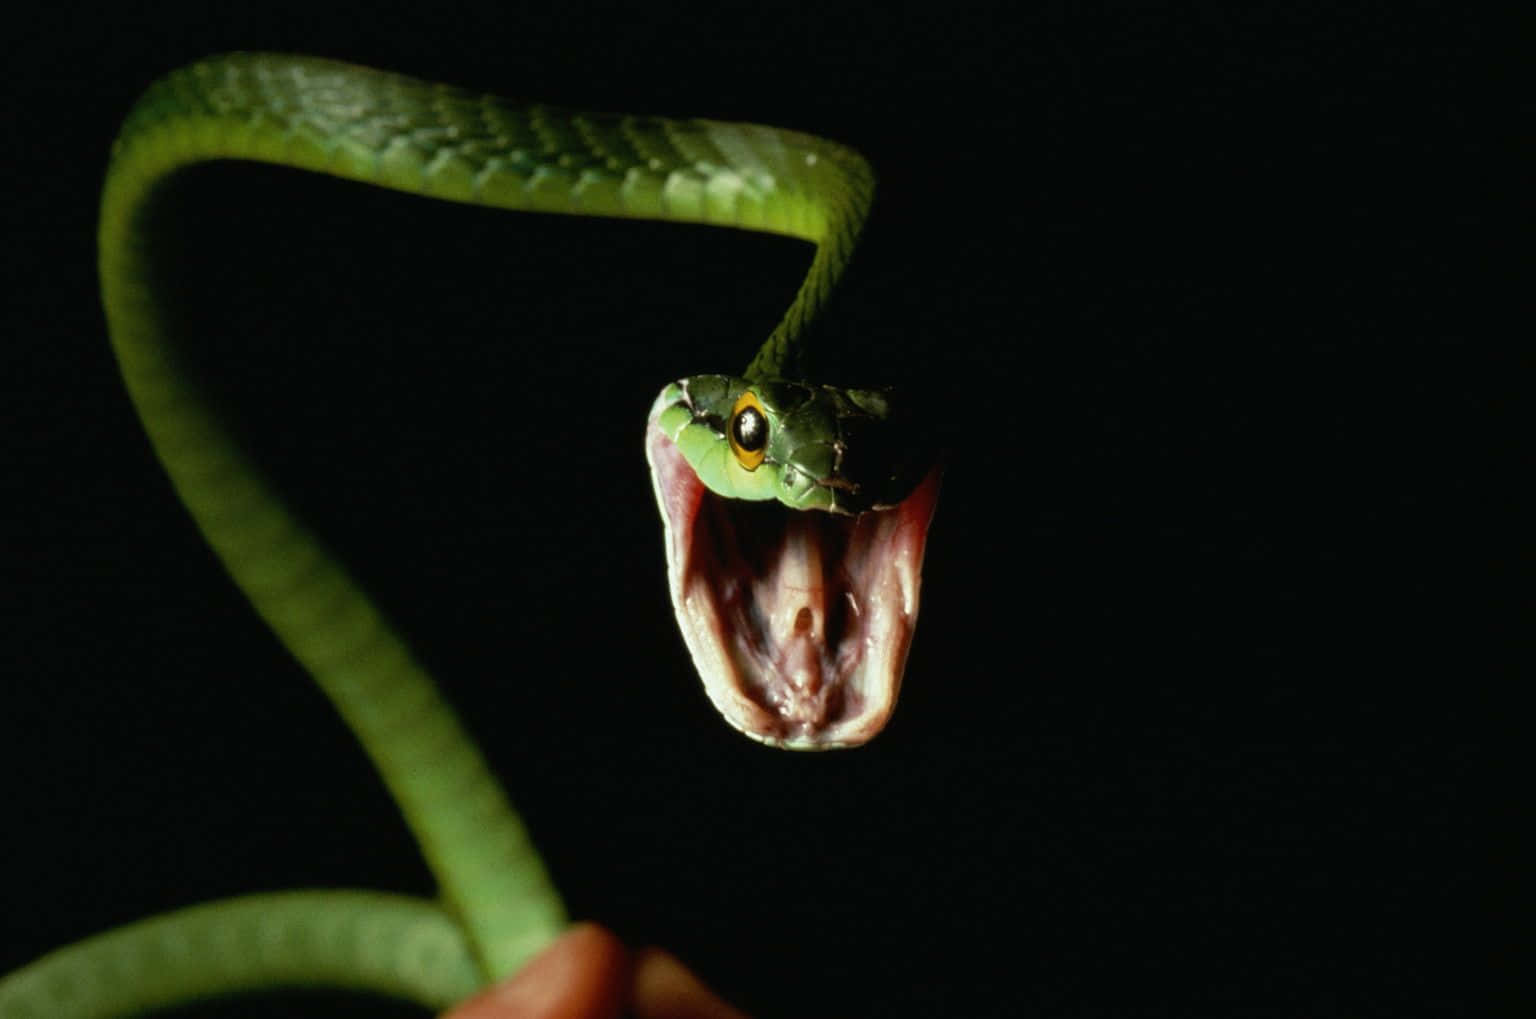 "This sinister-looking snake is ready to strike fear into the hearts of all who dare look at it."